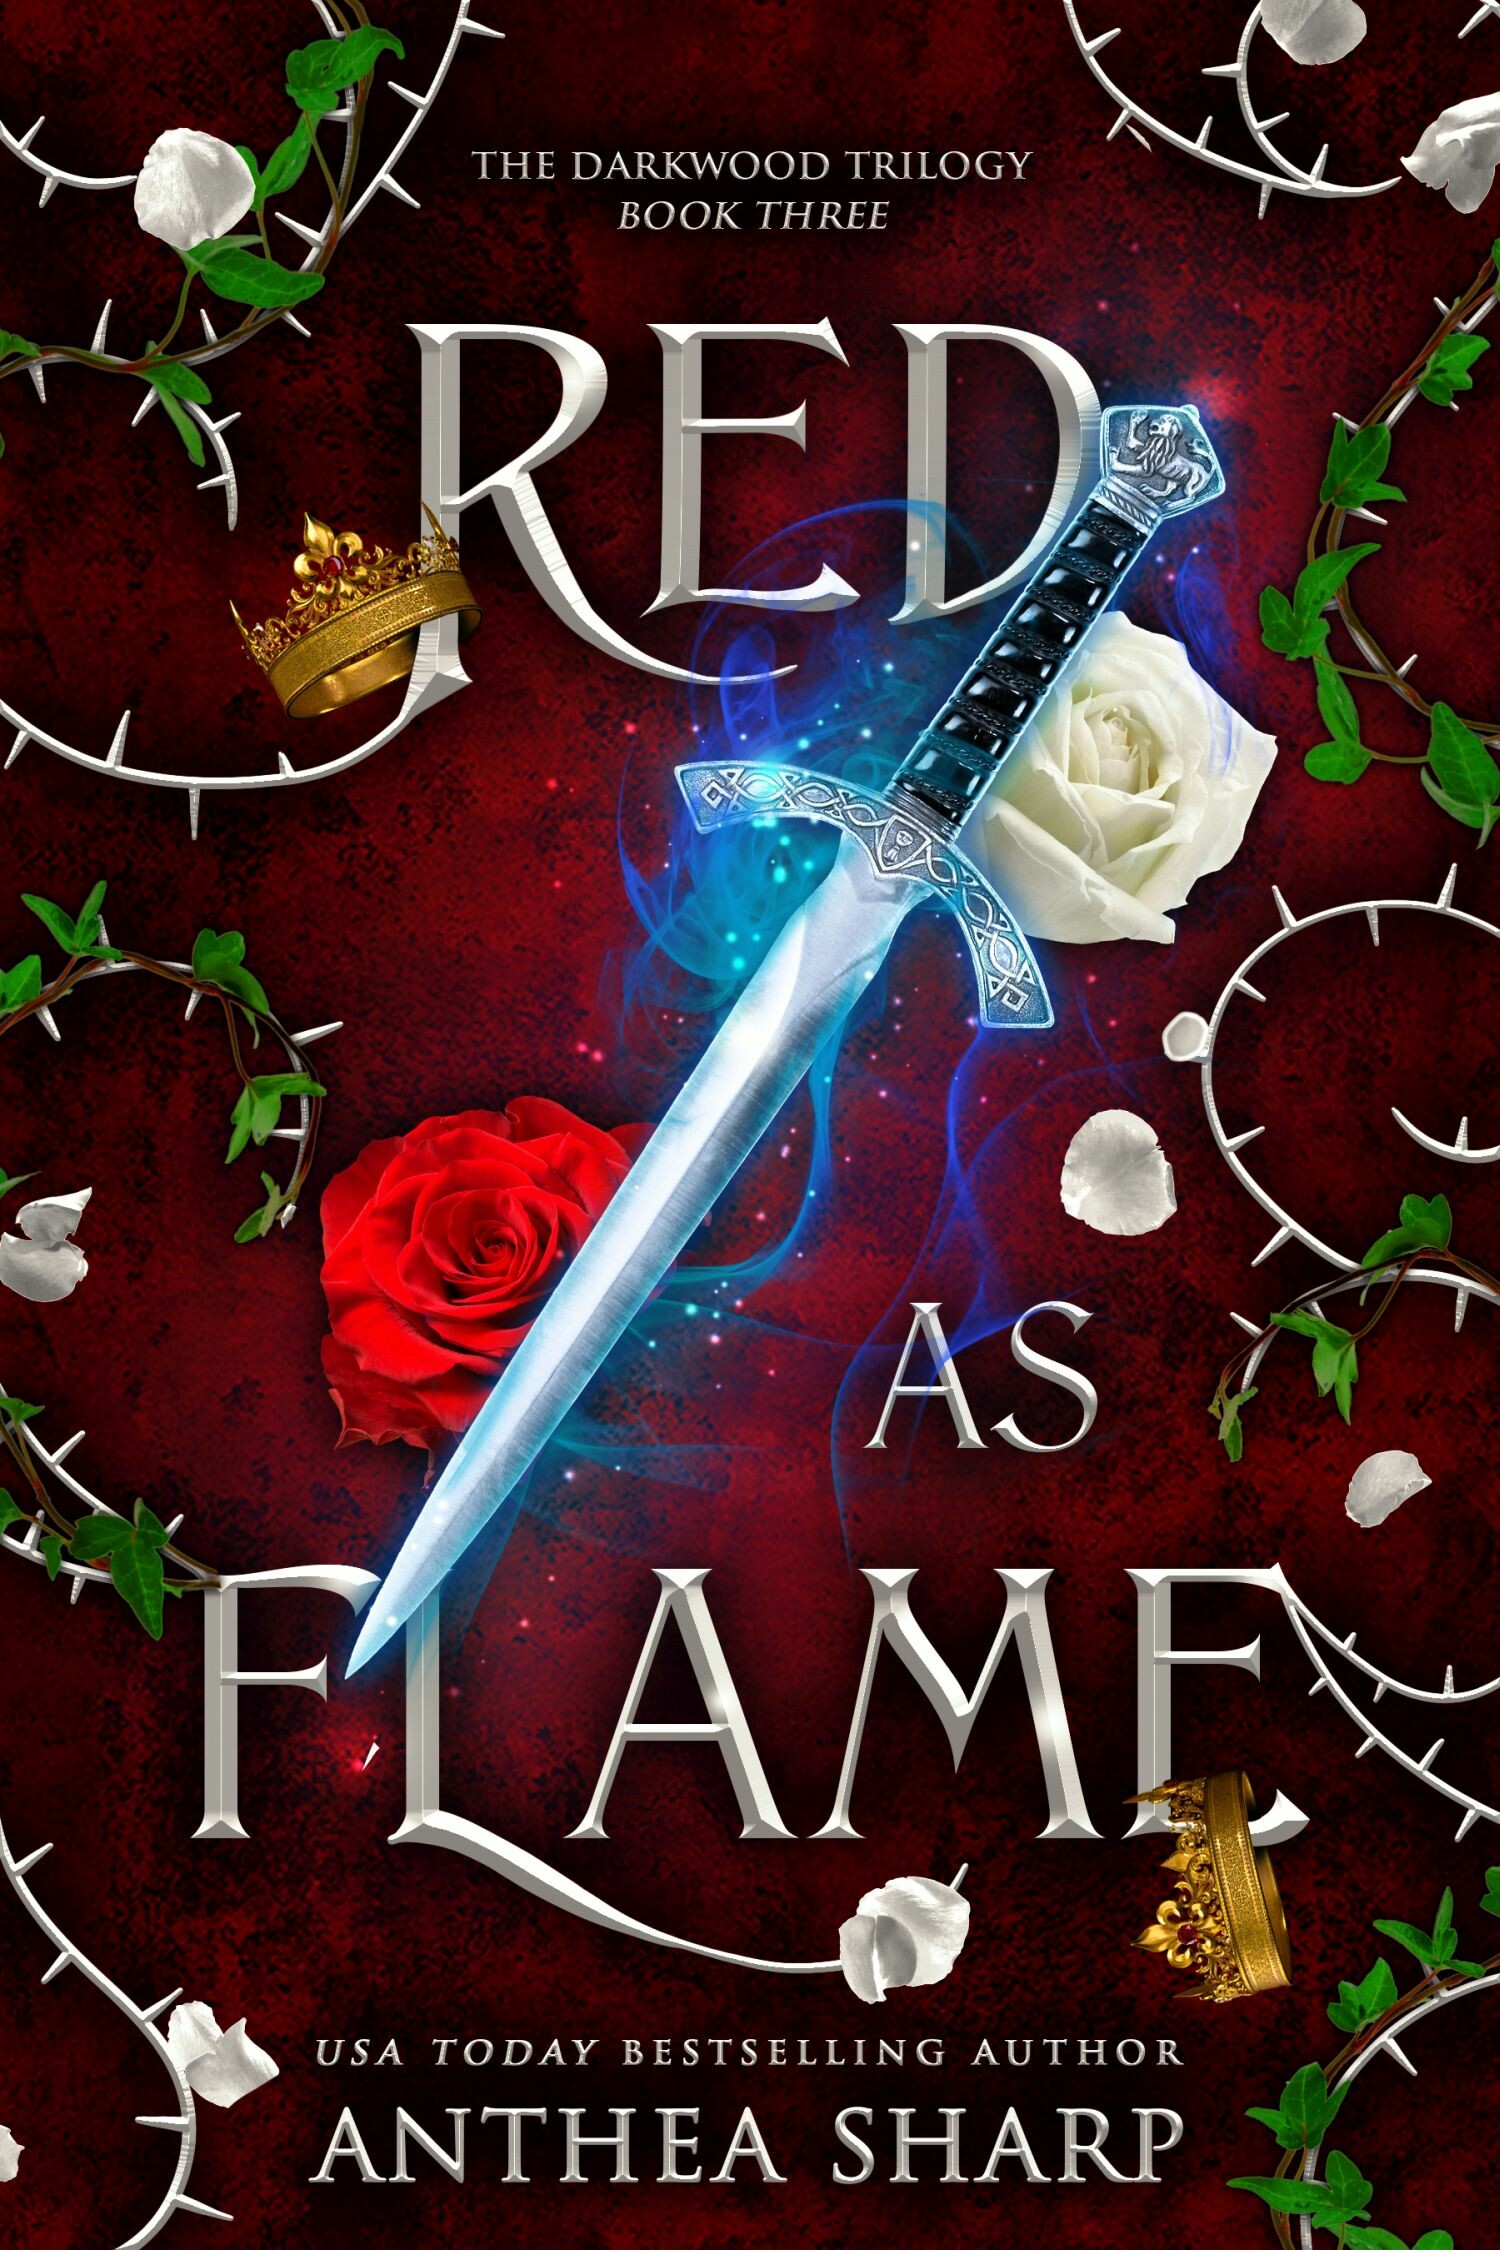 Red as Flame